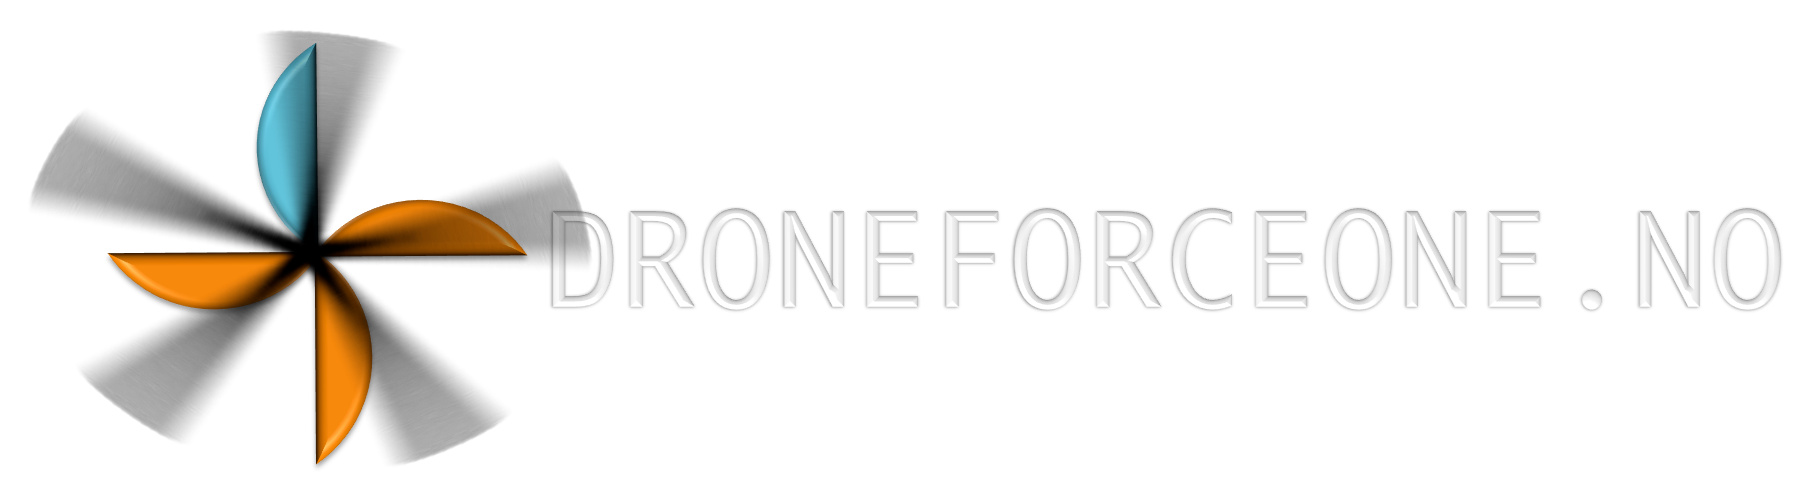 Drone Force One